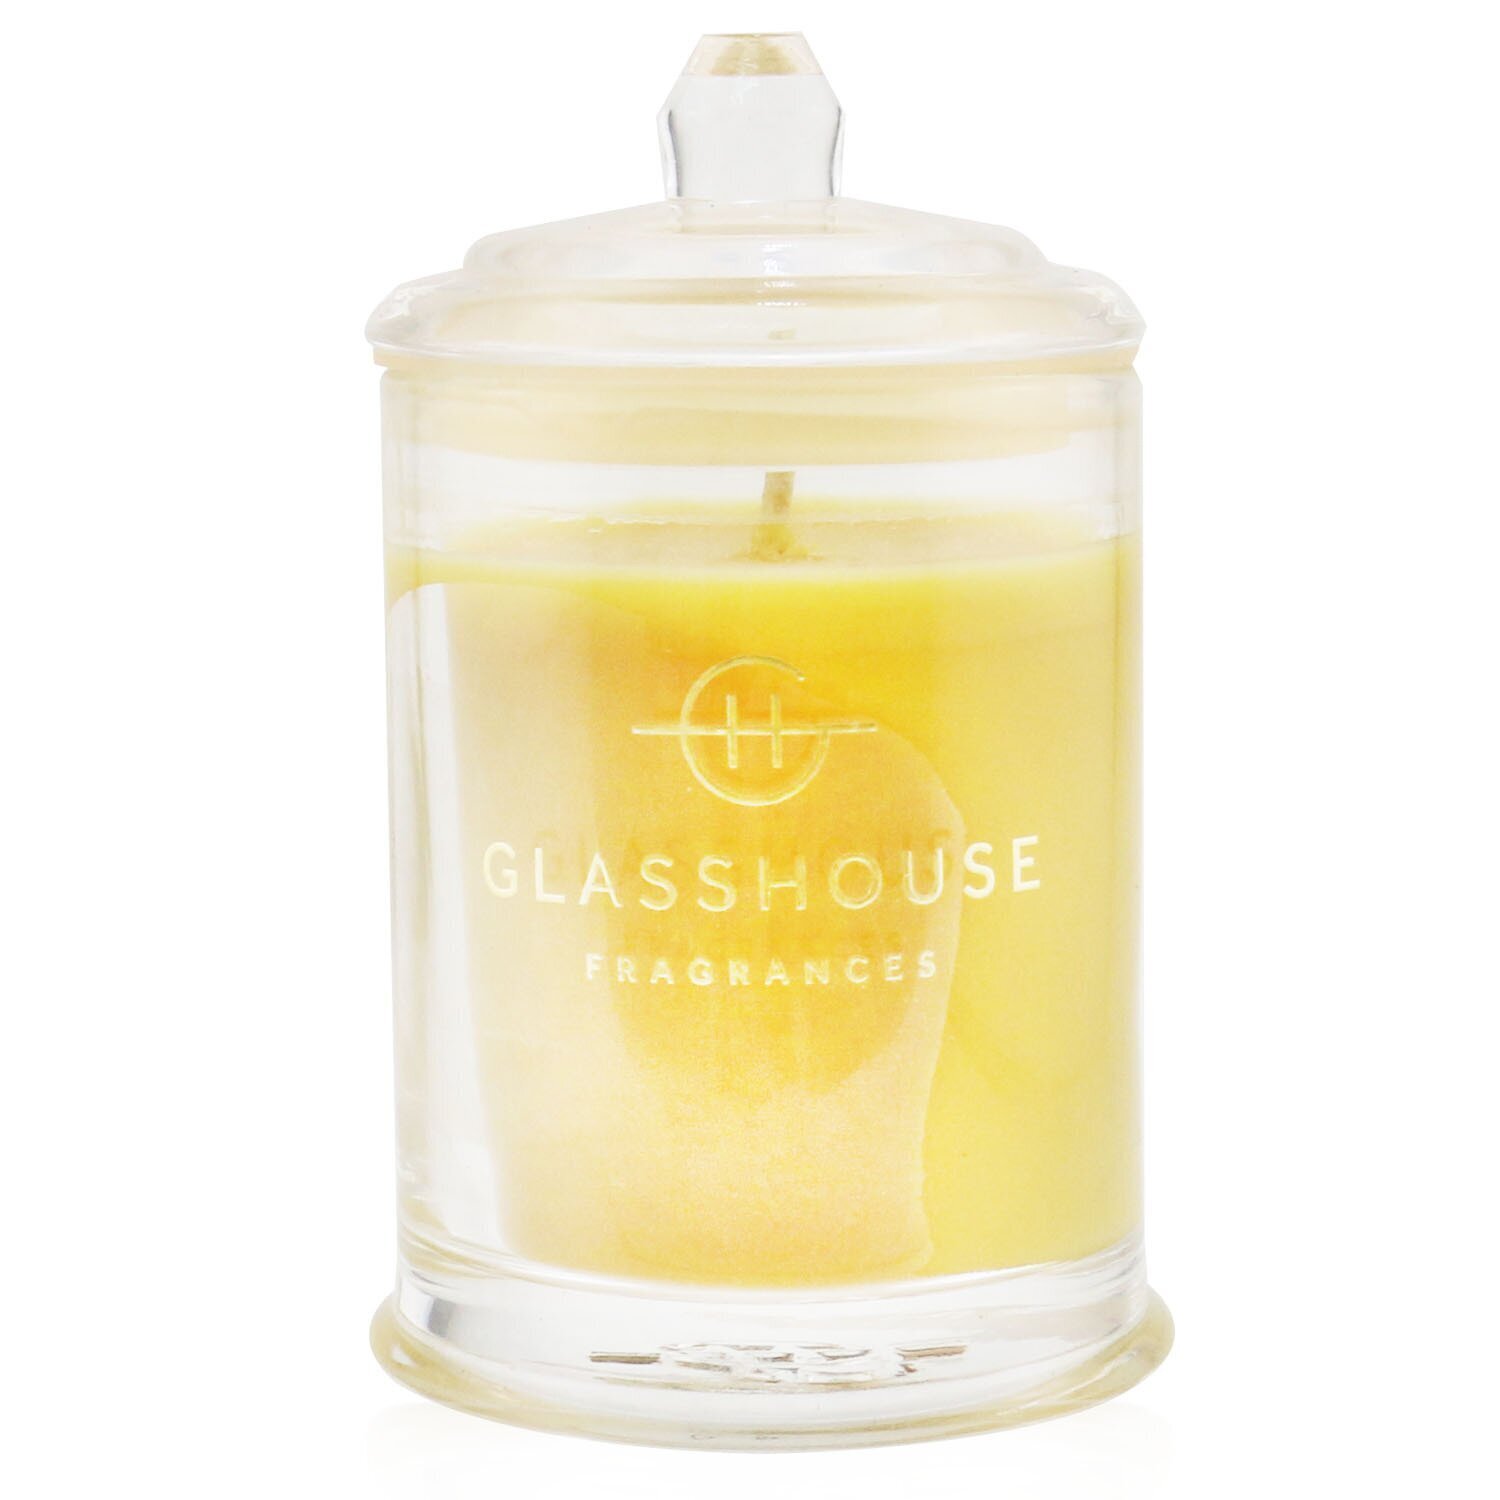 20%OFF Glasshouse A Tahaa Affair 2x380g Soy Candle Vanilla Caramel TripleScented 